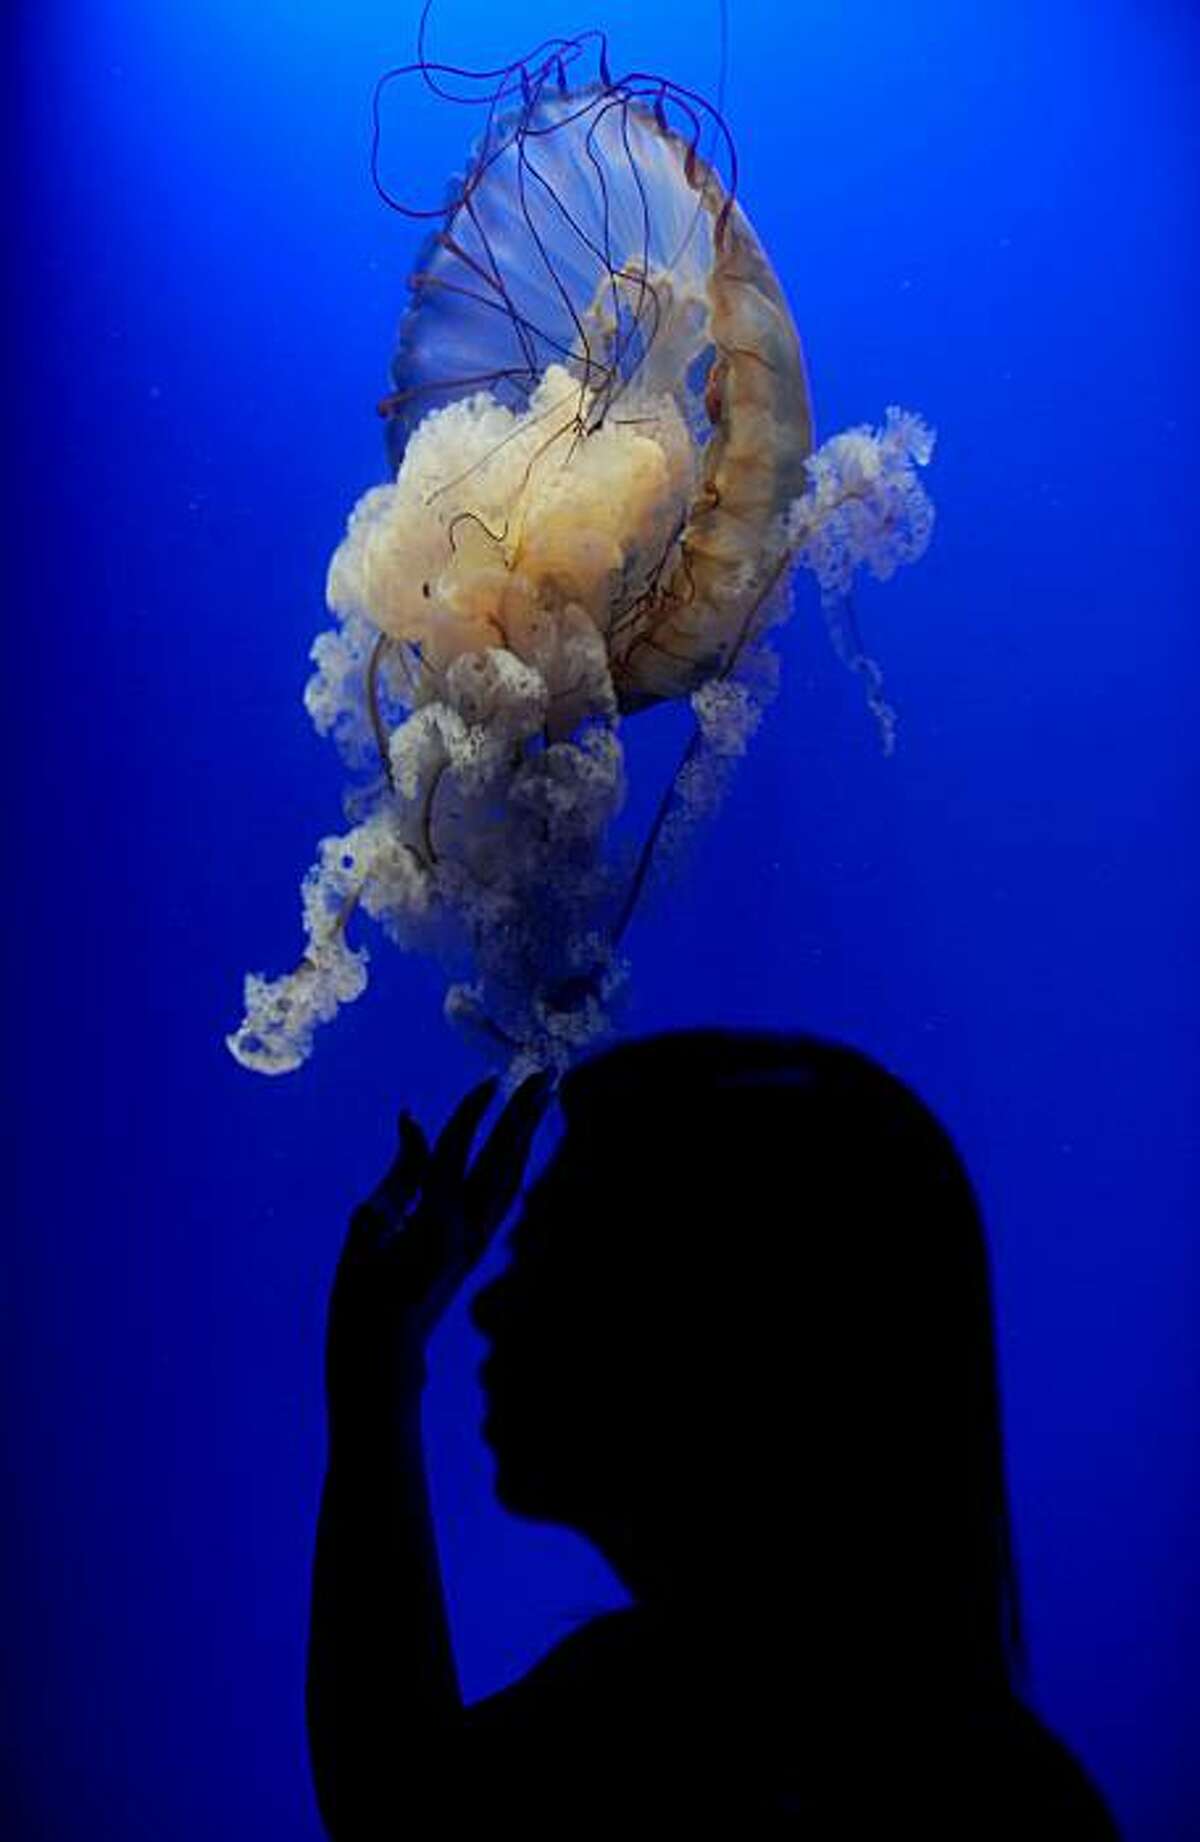 A woman looks at a Pacific sea nettle jellyfish at a marine themed park in Hong Kong on October 20, 2010. Results of the first ever global marine life census were unveiled on October 4, revealing a startling overview after a decade-long trawl through themurky depths. The Census of Marine Life estimated there are more than one million species in the oceans, with at least three-quarters of them yet to be discovered.